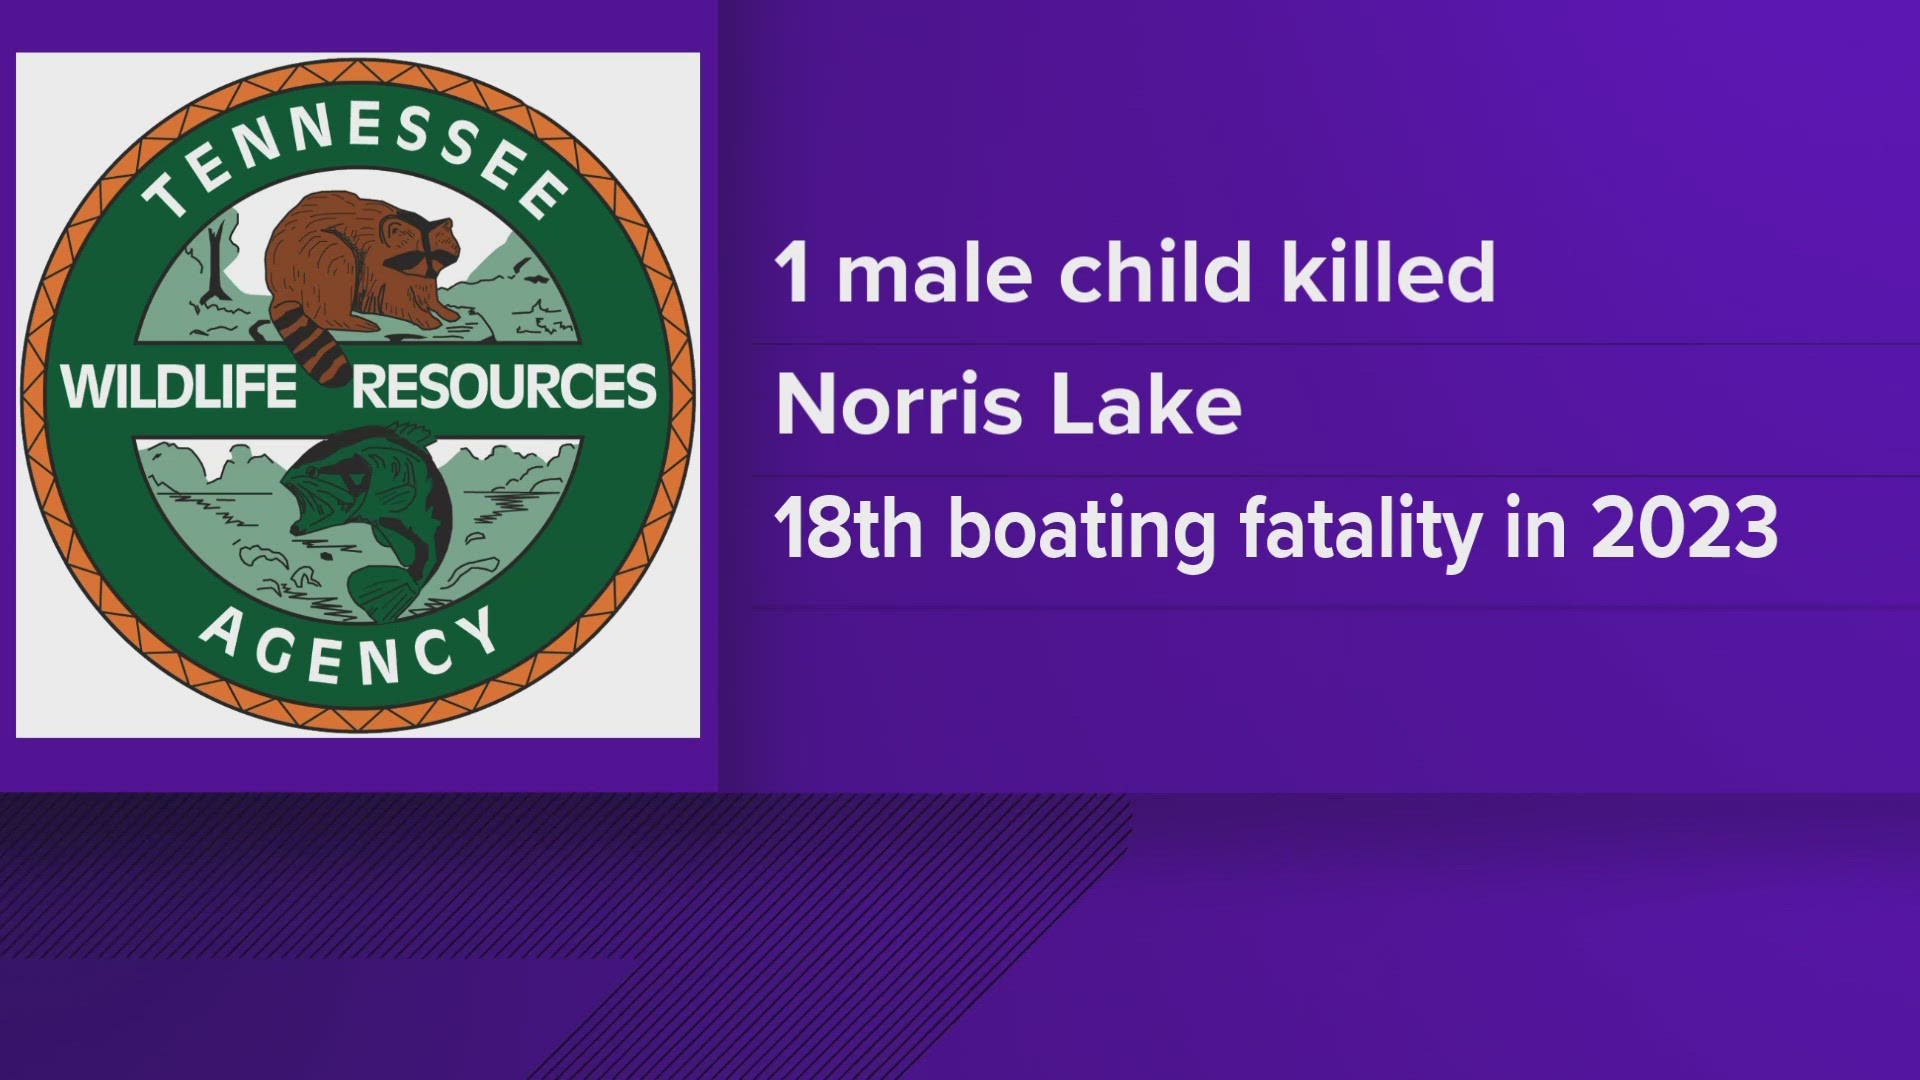 The boat collision on Norris Lake on Saturday resulted in the death of a male child. The crash marks the 18th boating-related fatality in 2023 so far.